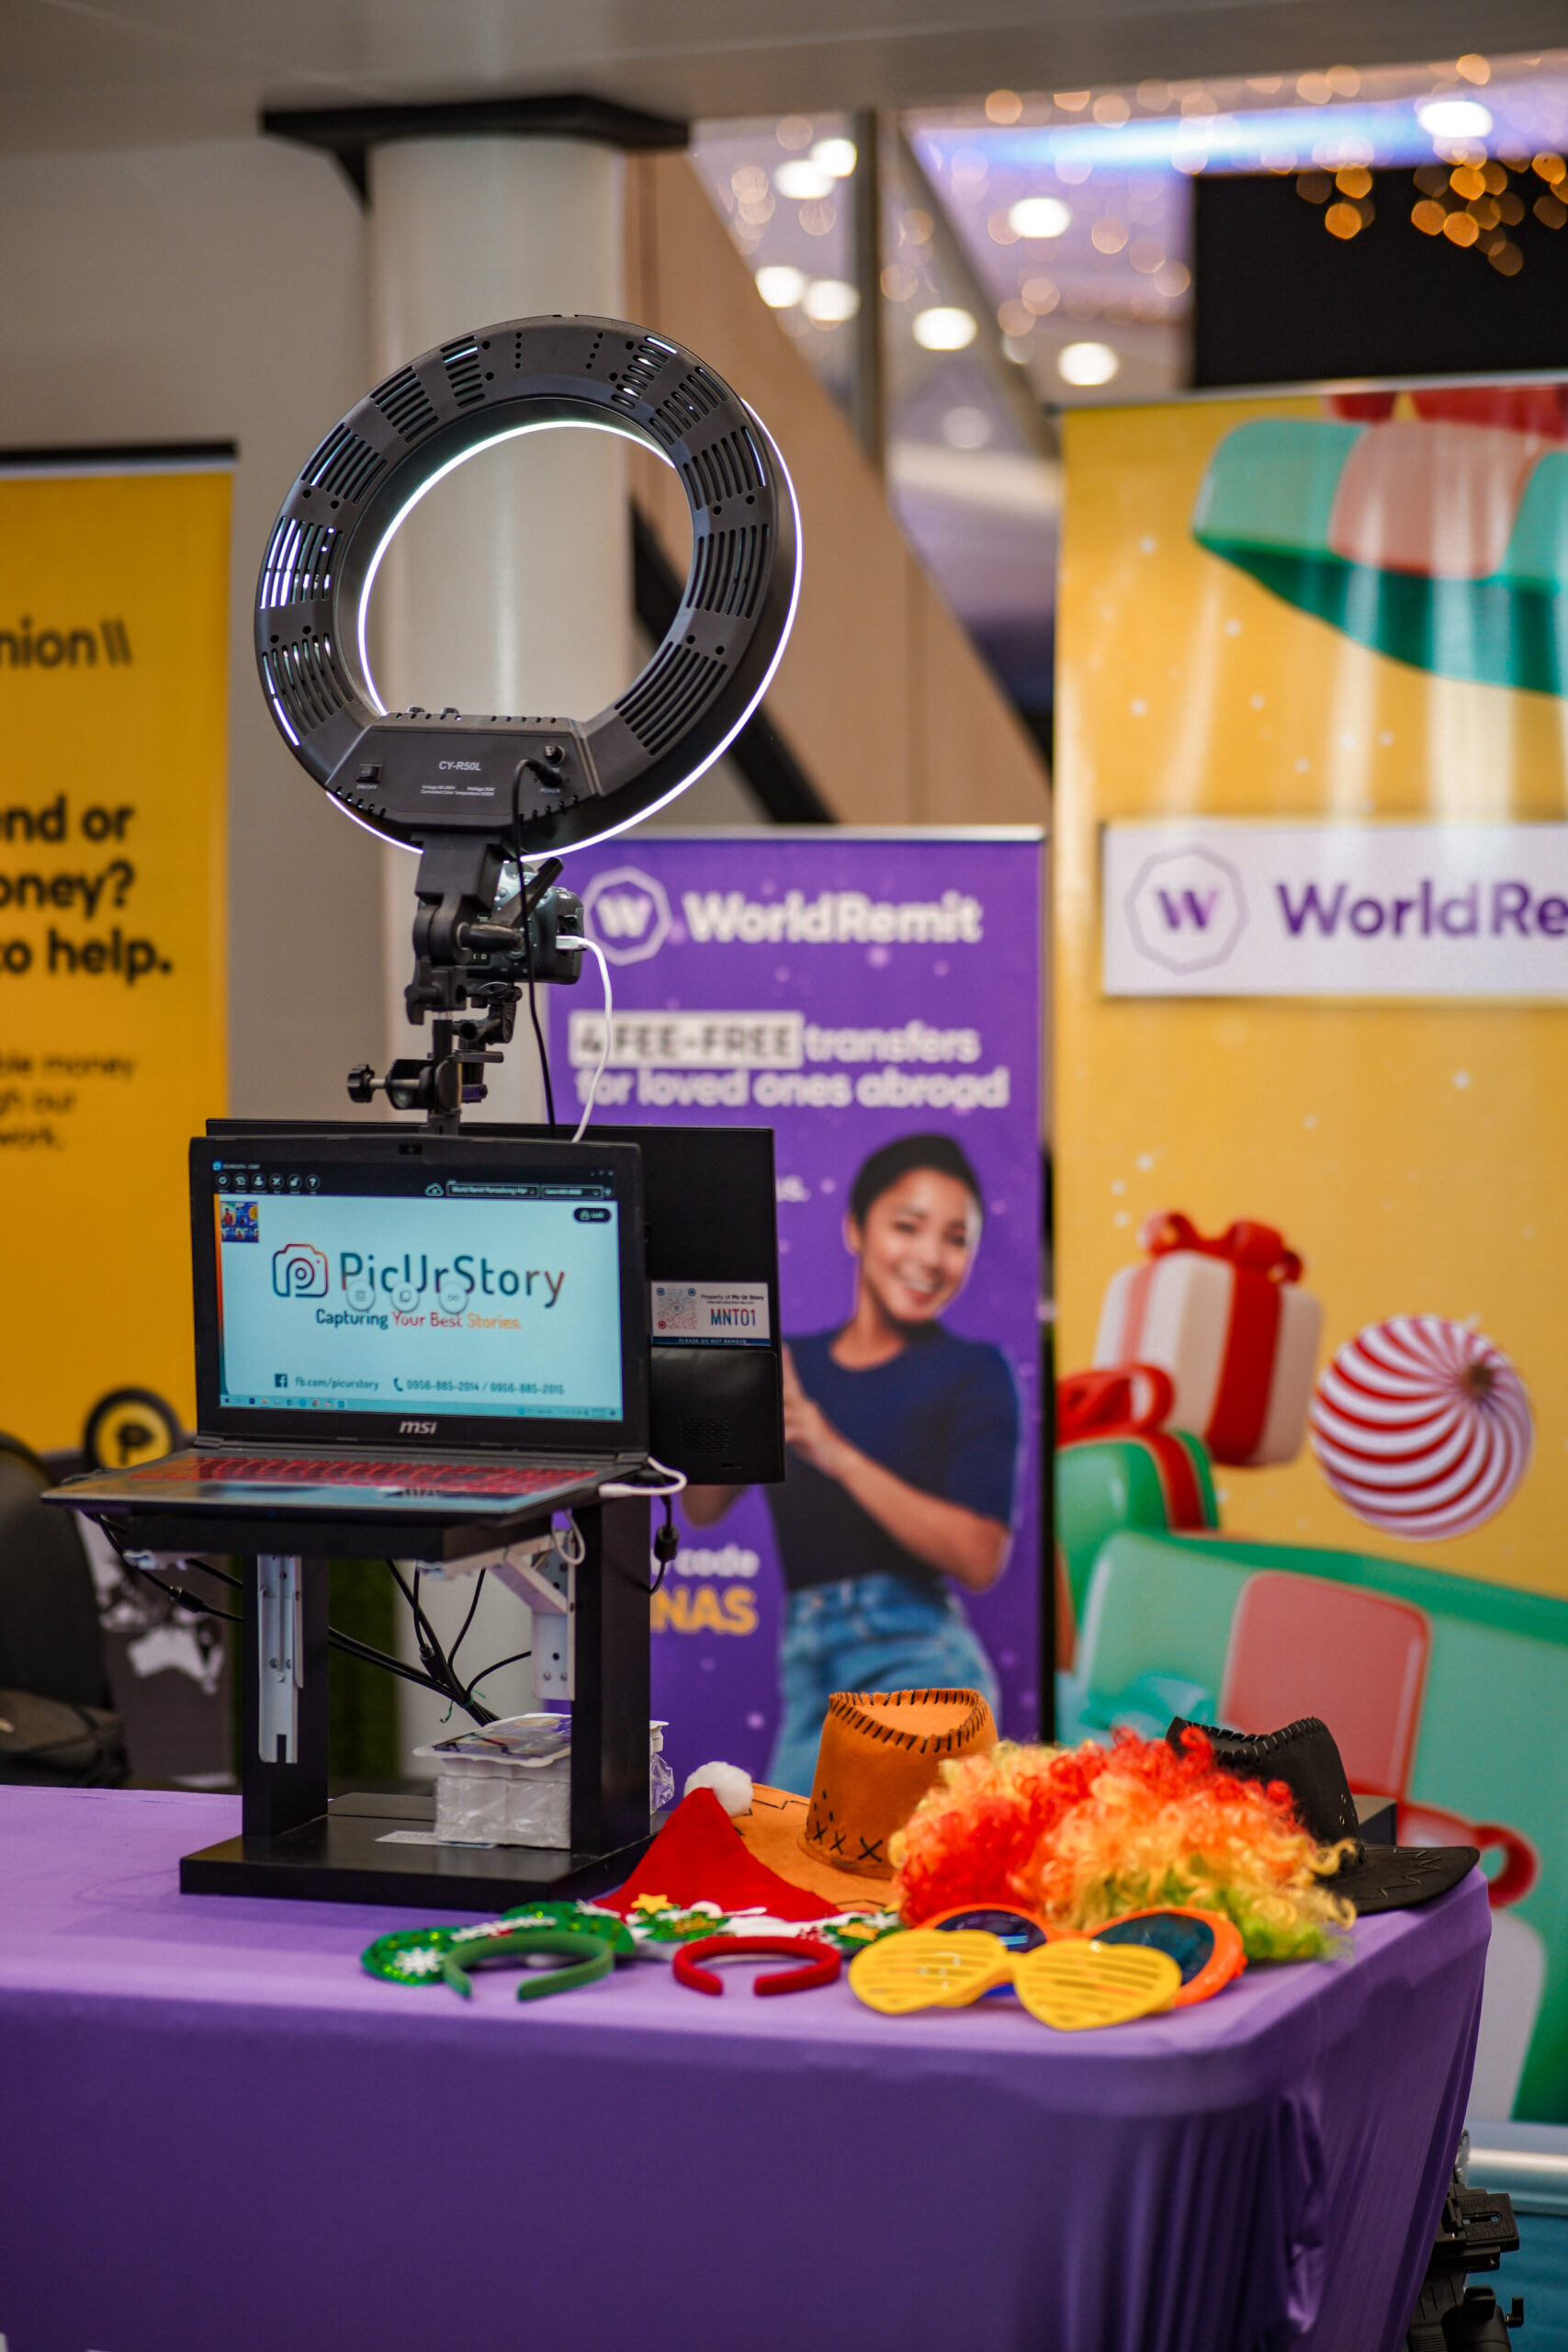 Pic Ur Story Photobooth Setup for World Remit Event 